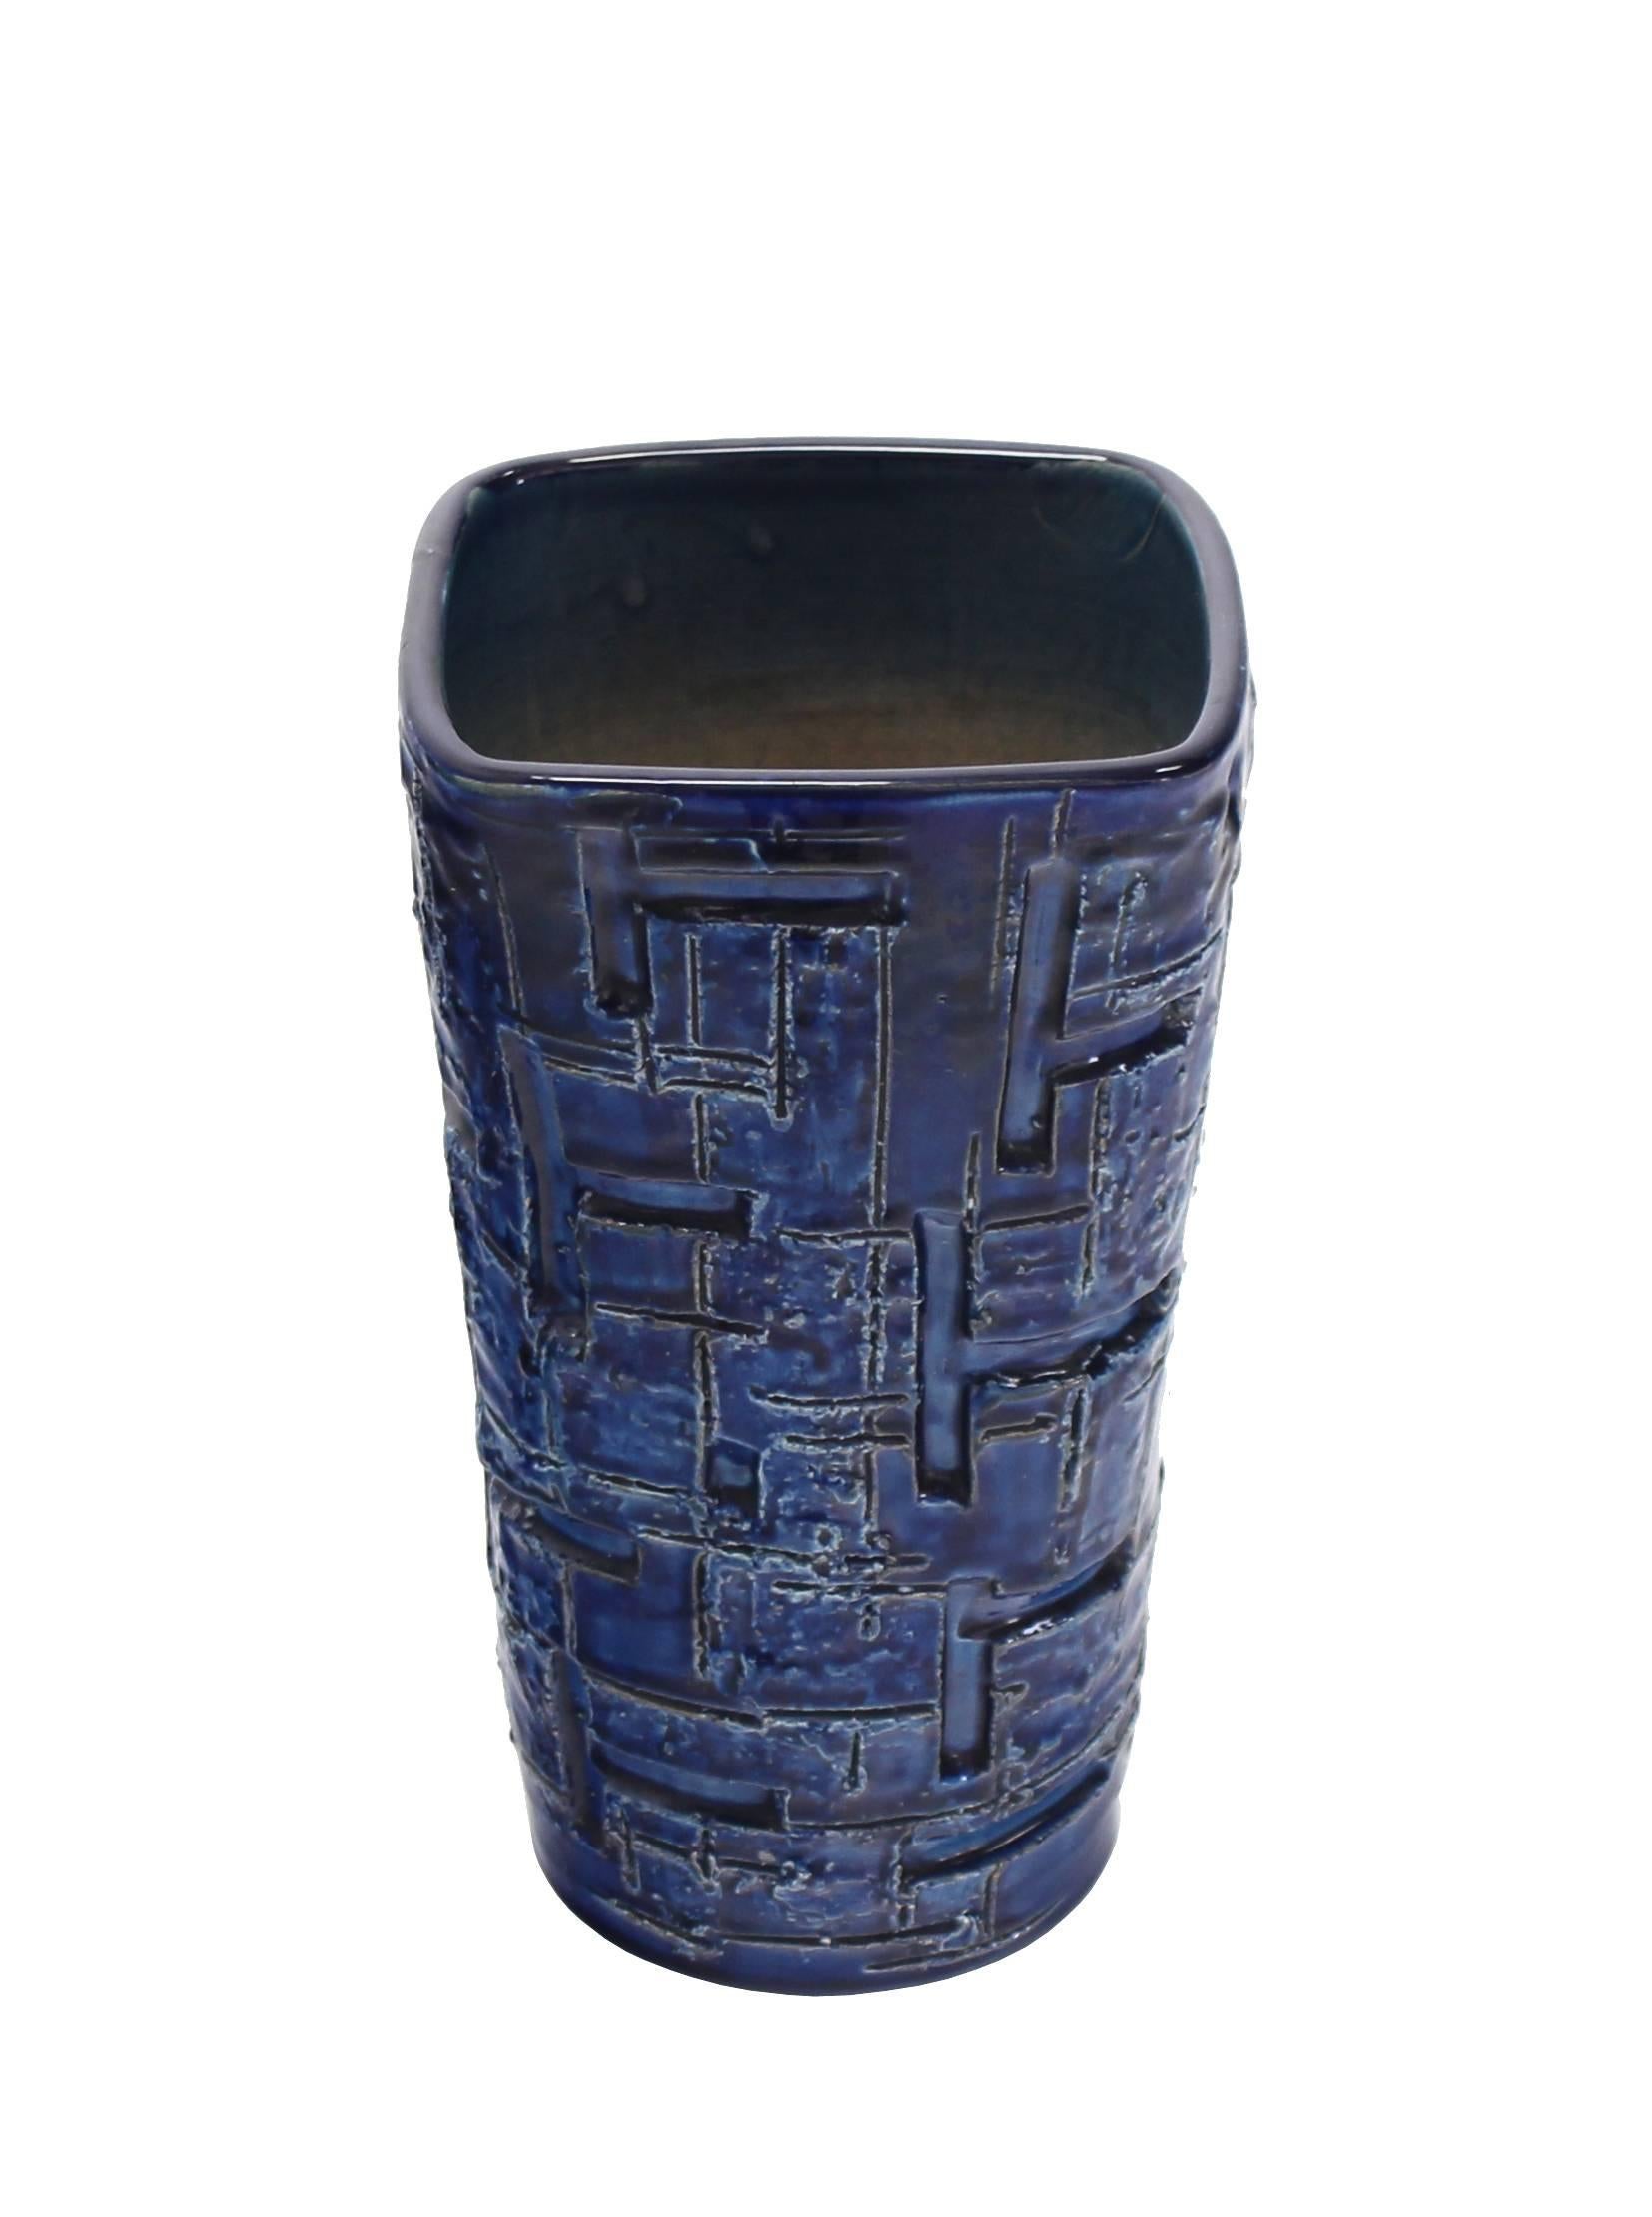 American Cobalt Blue Glaze Mid-Century Modern Tapered Shape Square to Round Pottery Vase